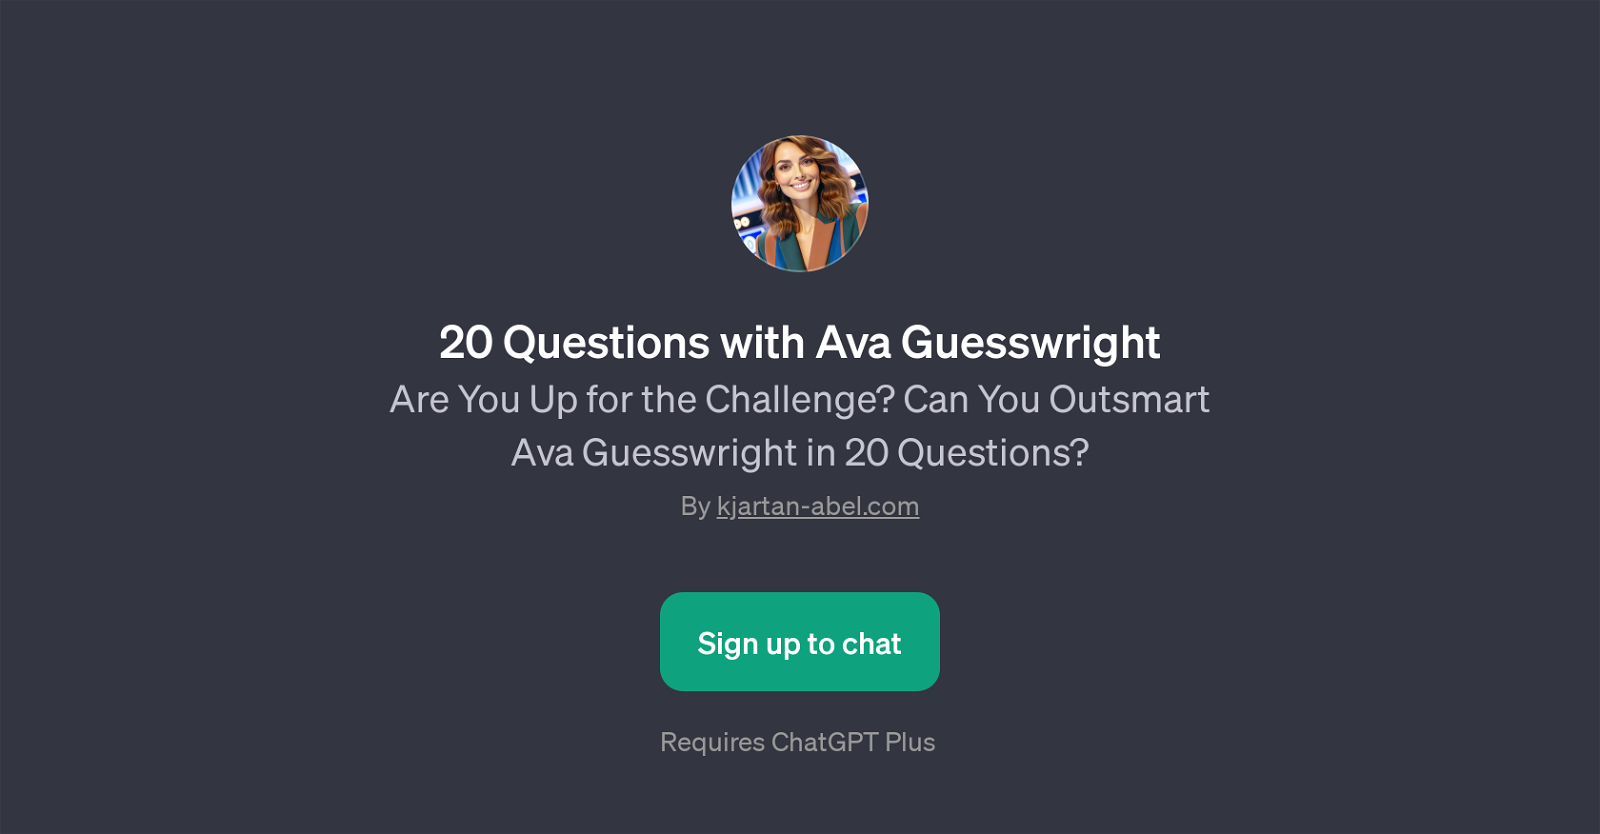 20 Questions with Ava Guesswright website